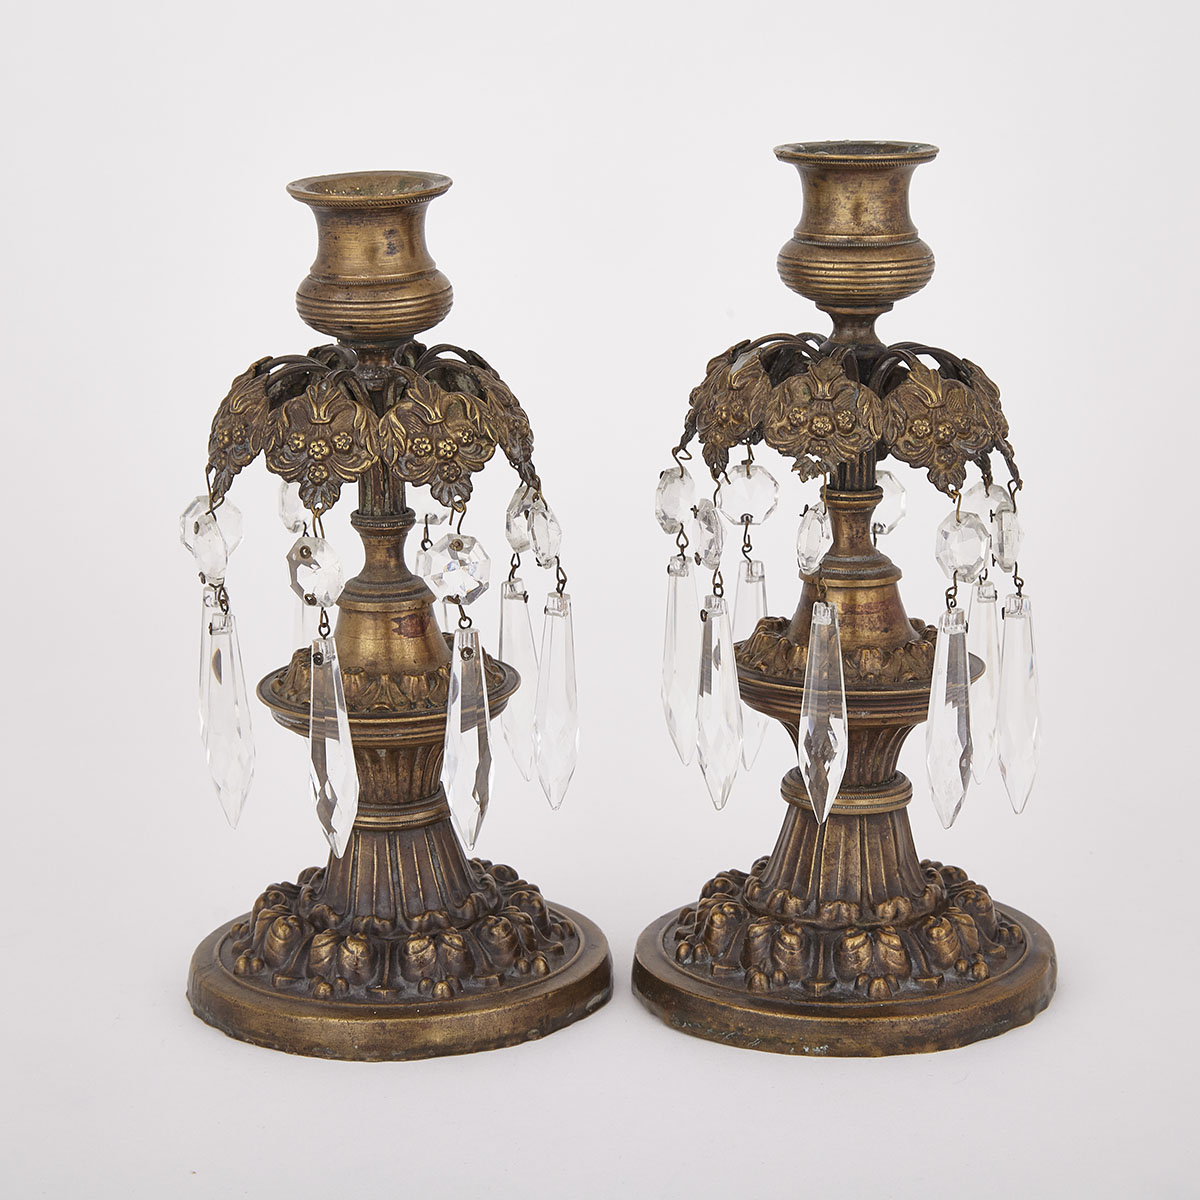 Pair of Regency Bronze and Cut Glass Lustre Candle Sticks, early 19th century